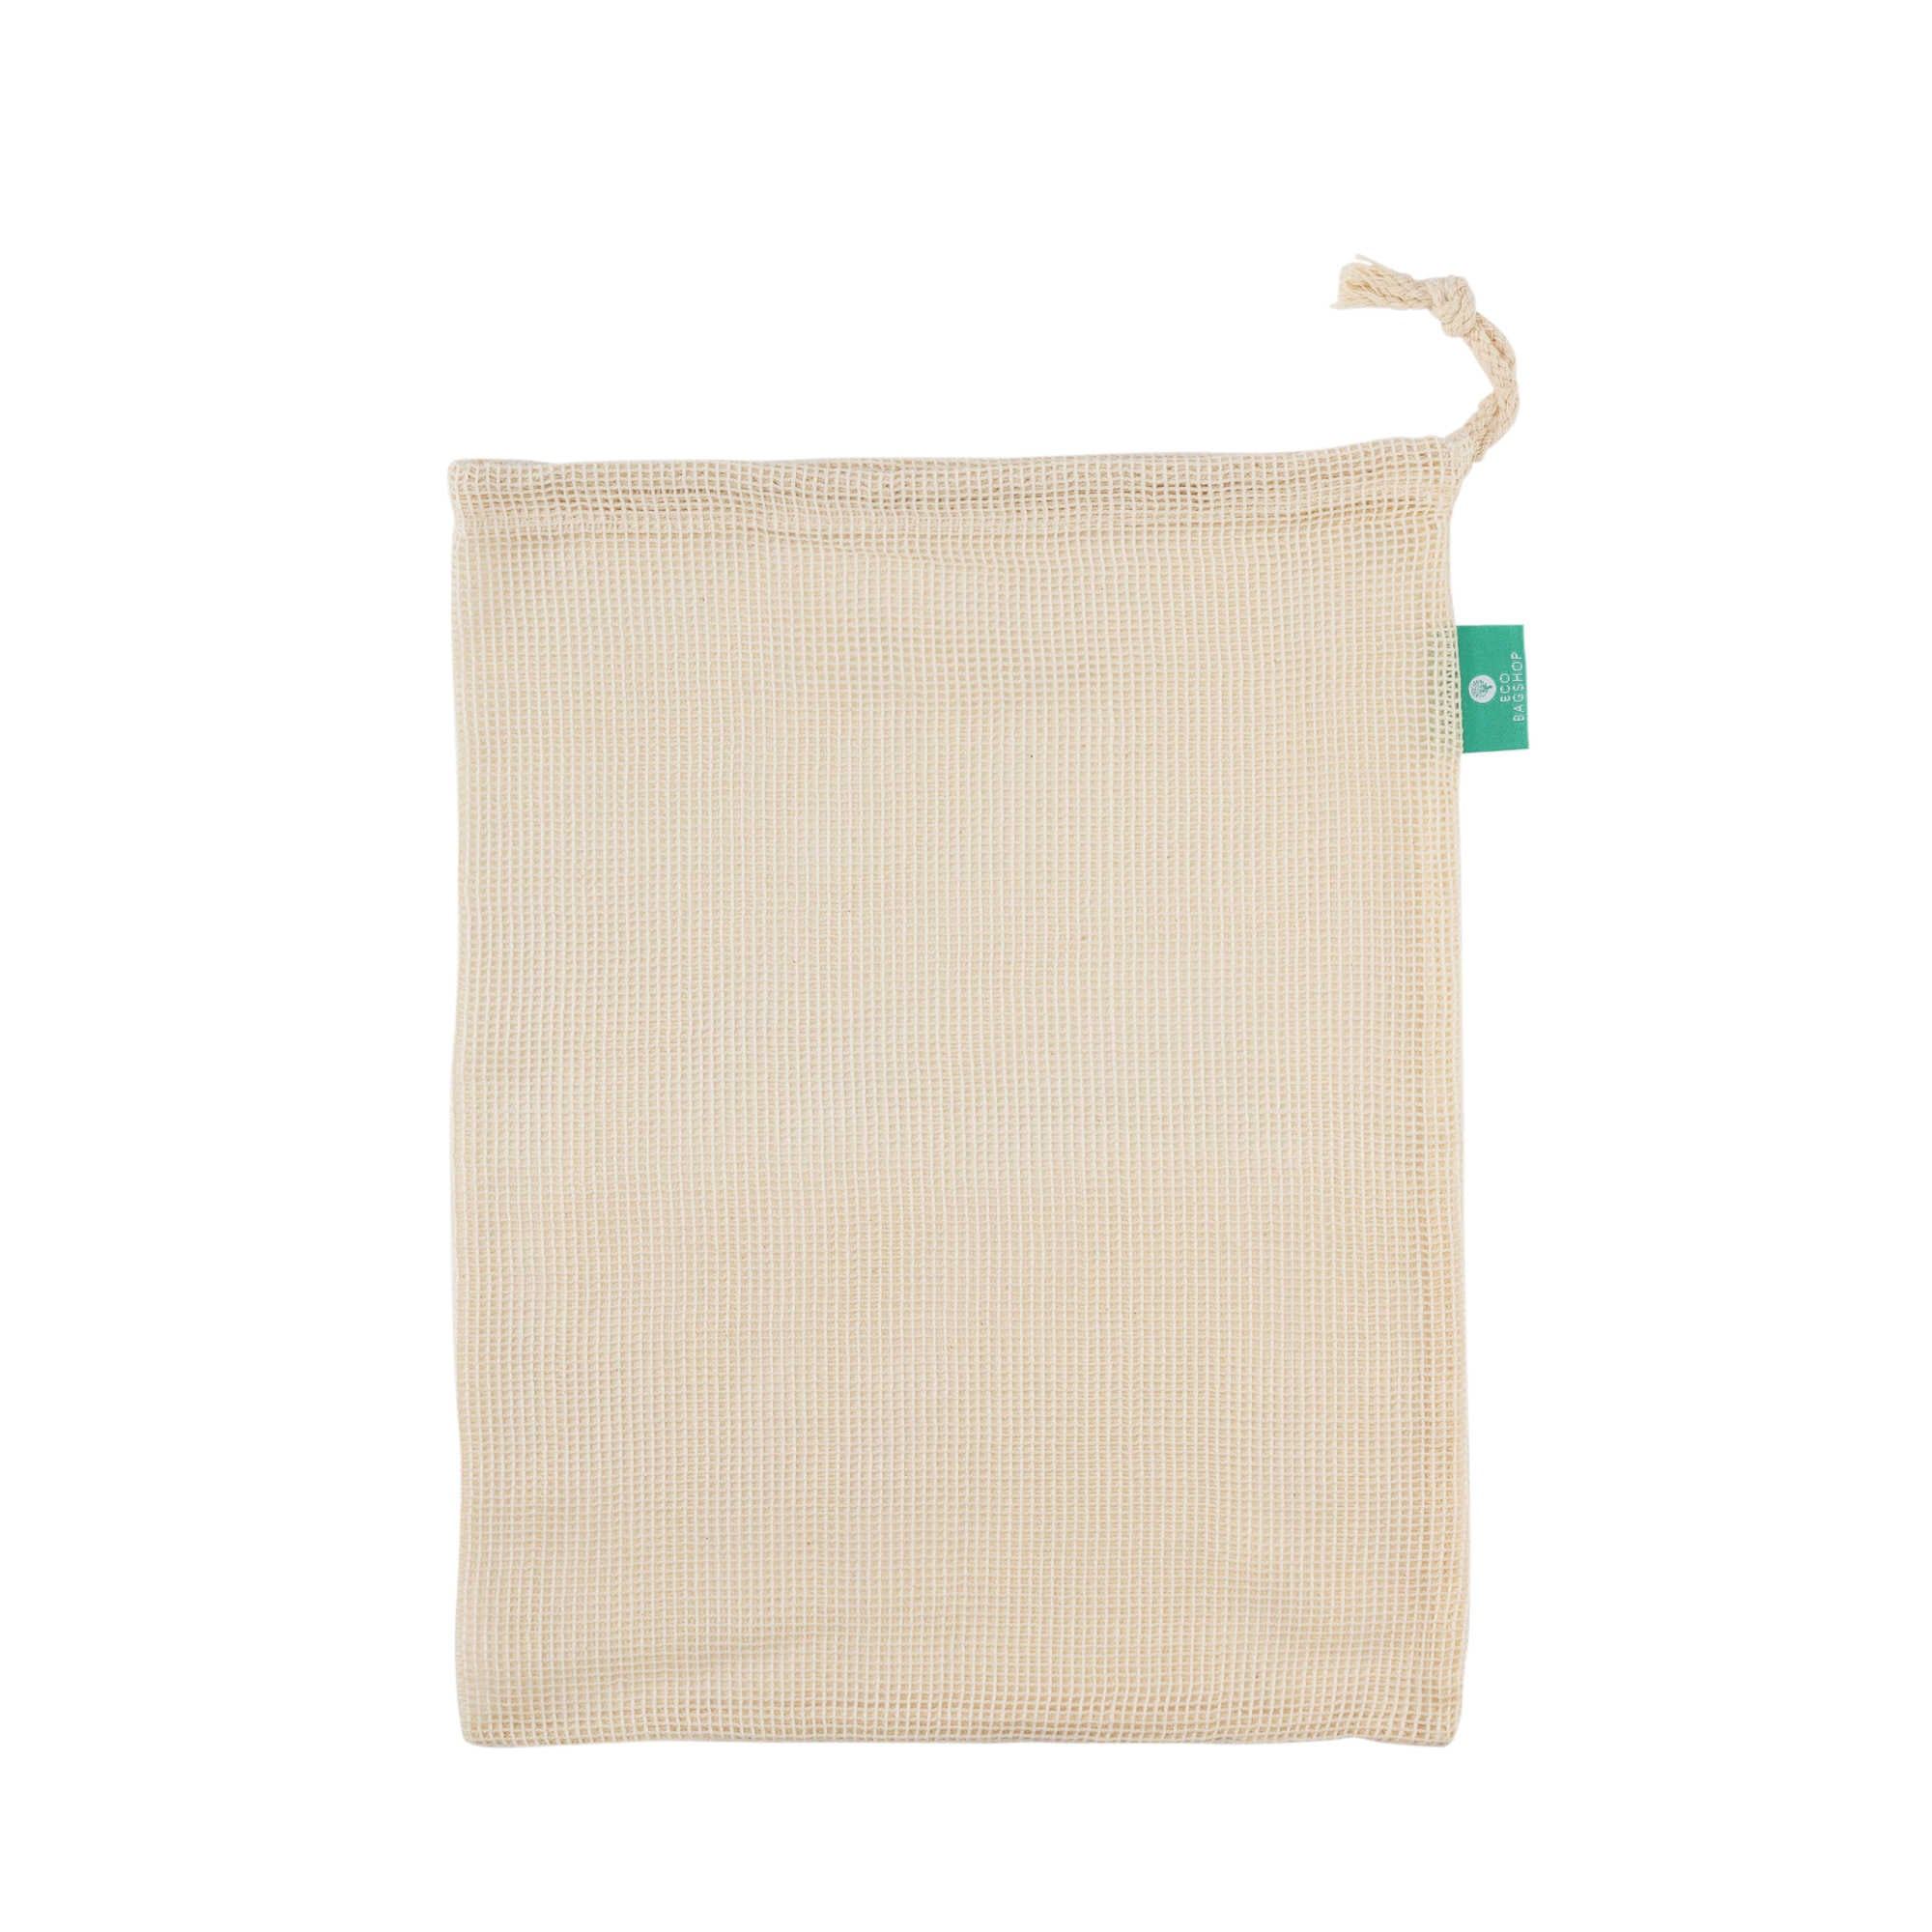 100% Natural Cotton Mesh Produce Storage Bag sold in 3/5/15 - Medium Size - Clothes Pegsale Australia